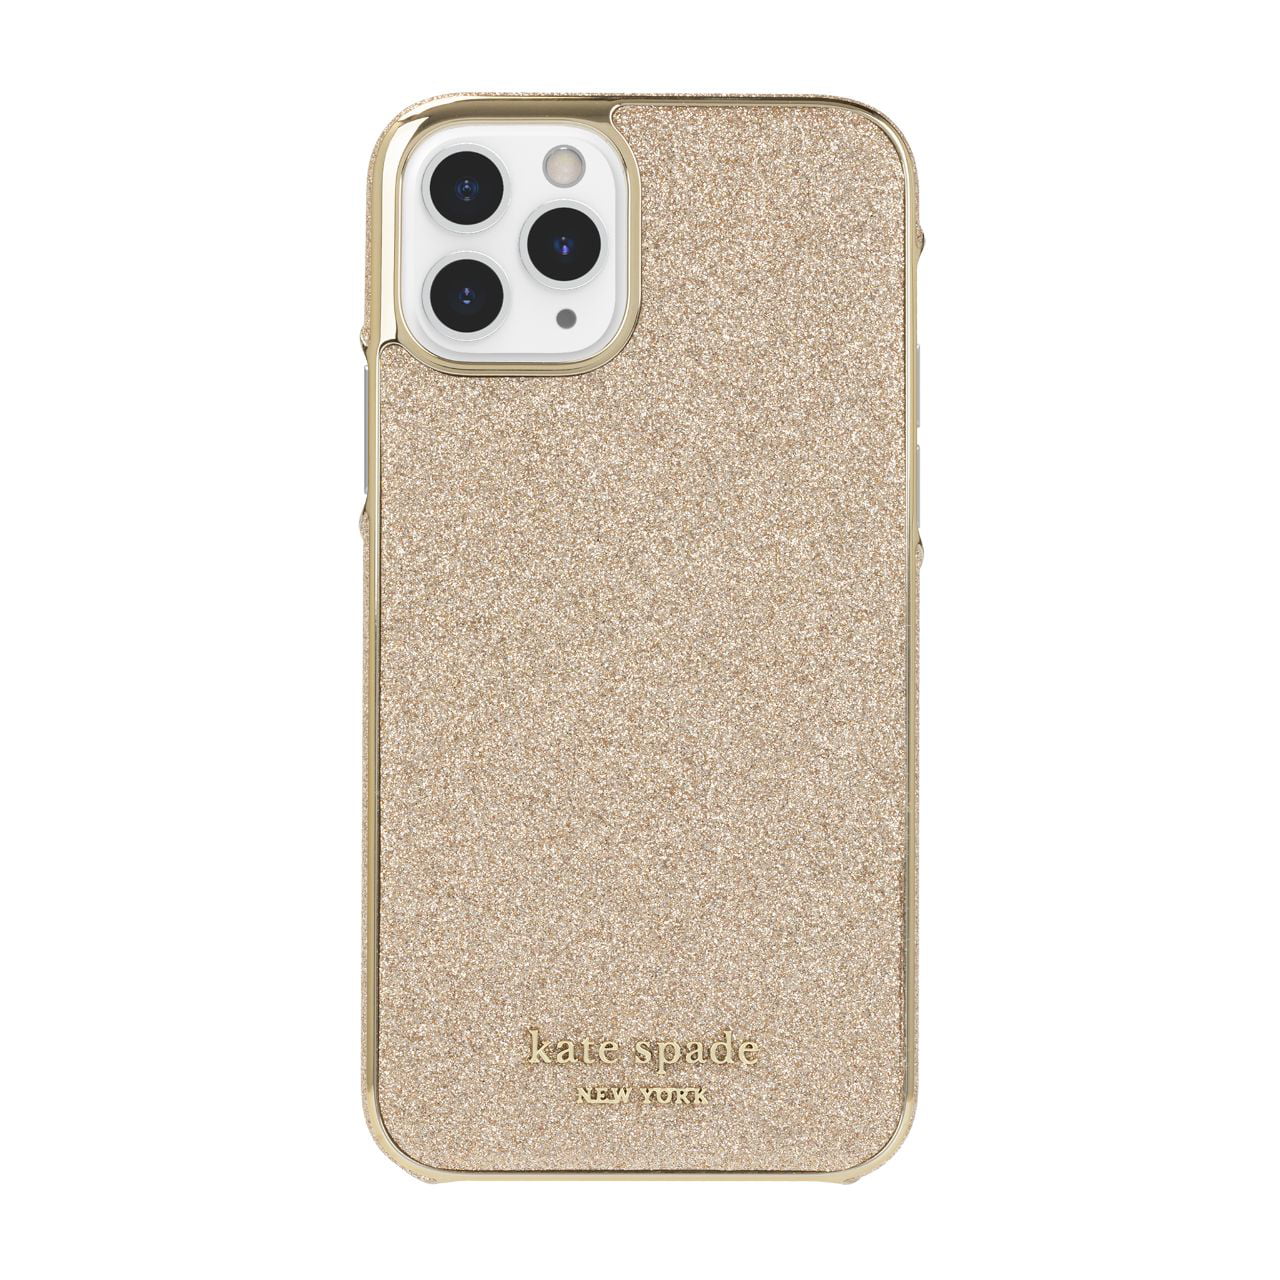 Kate Spade Wrap Case Gold Munera Glitter for iPhone 11 Pro Cases